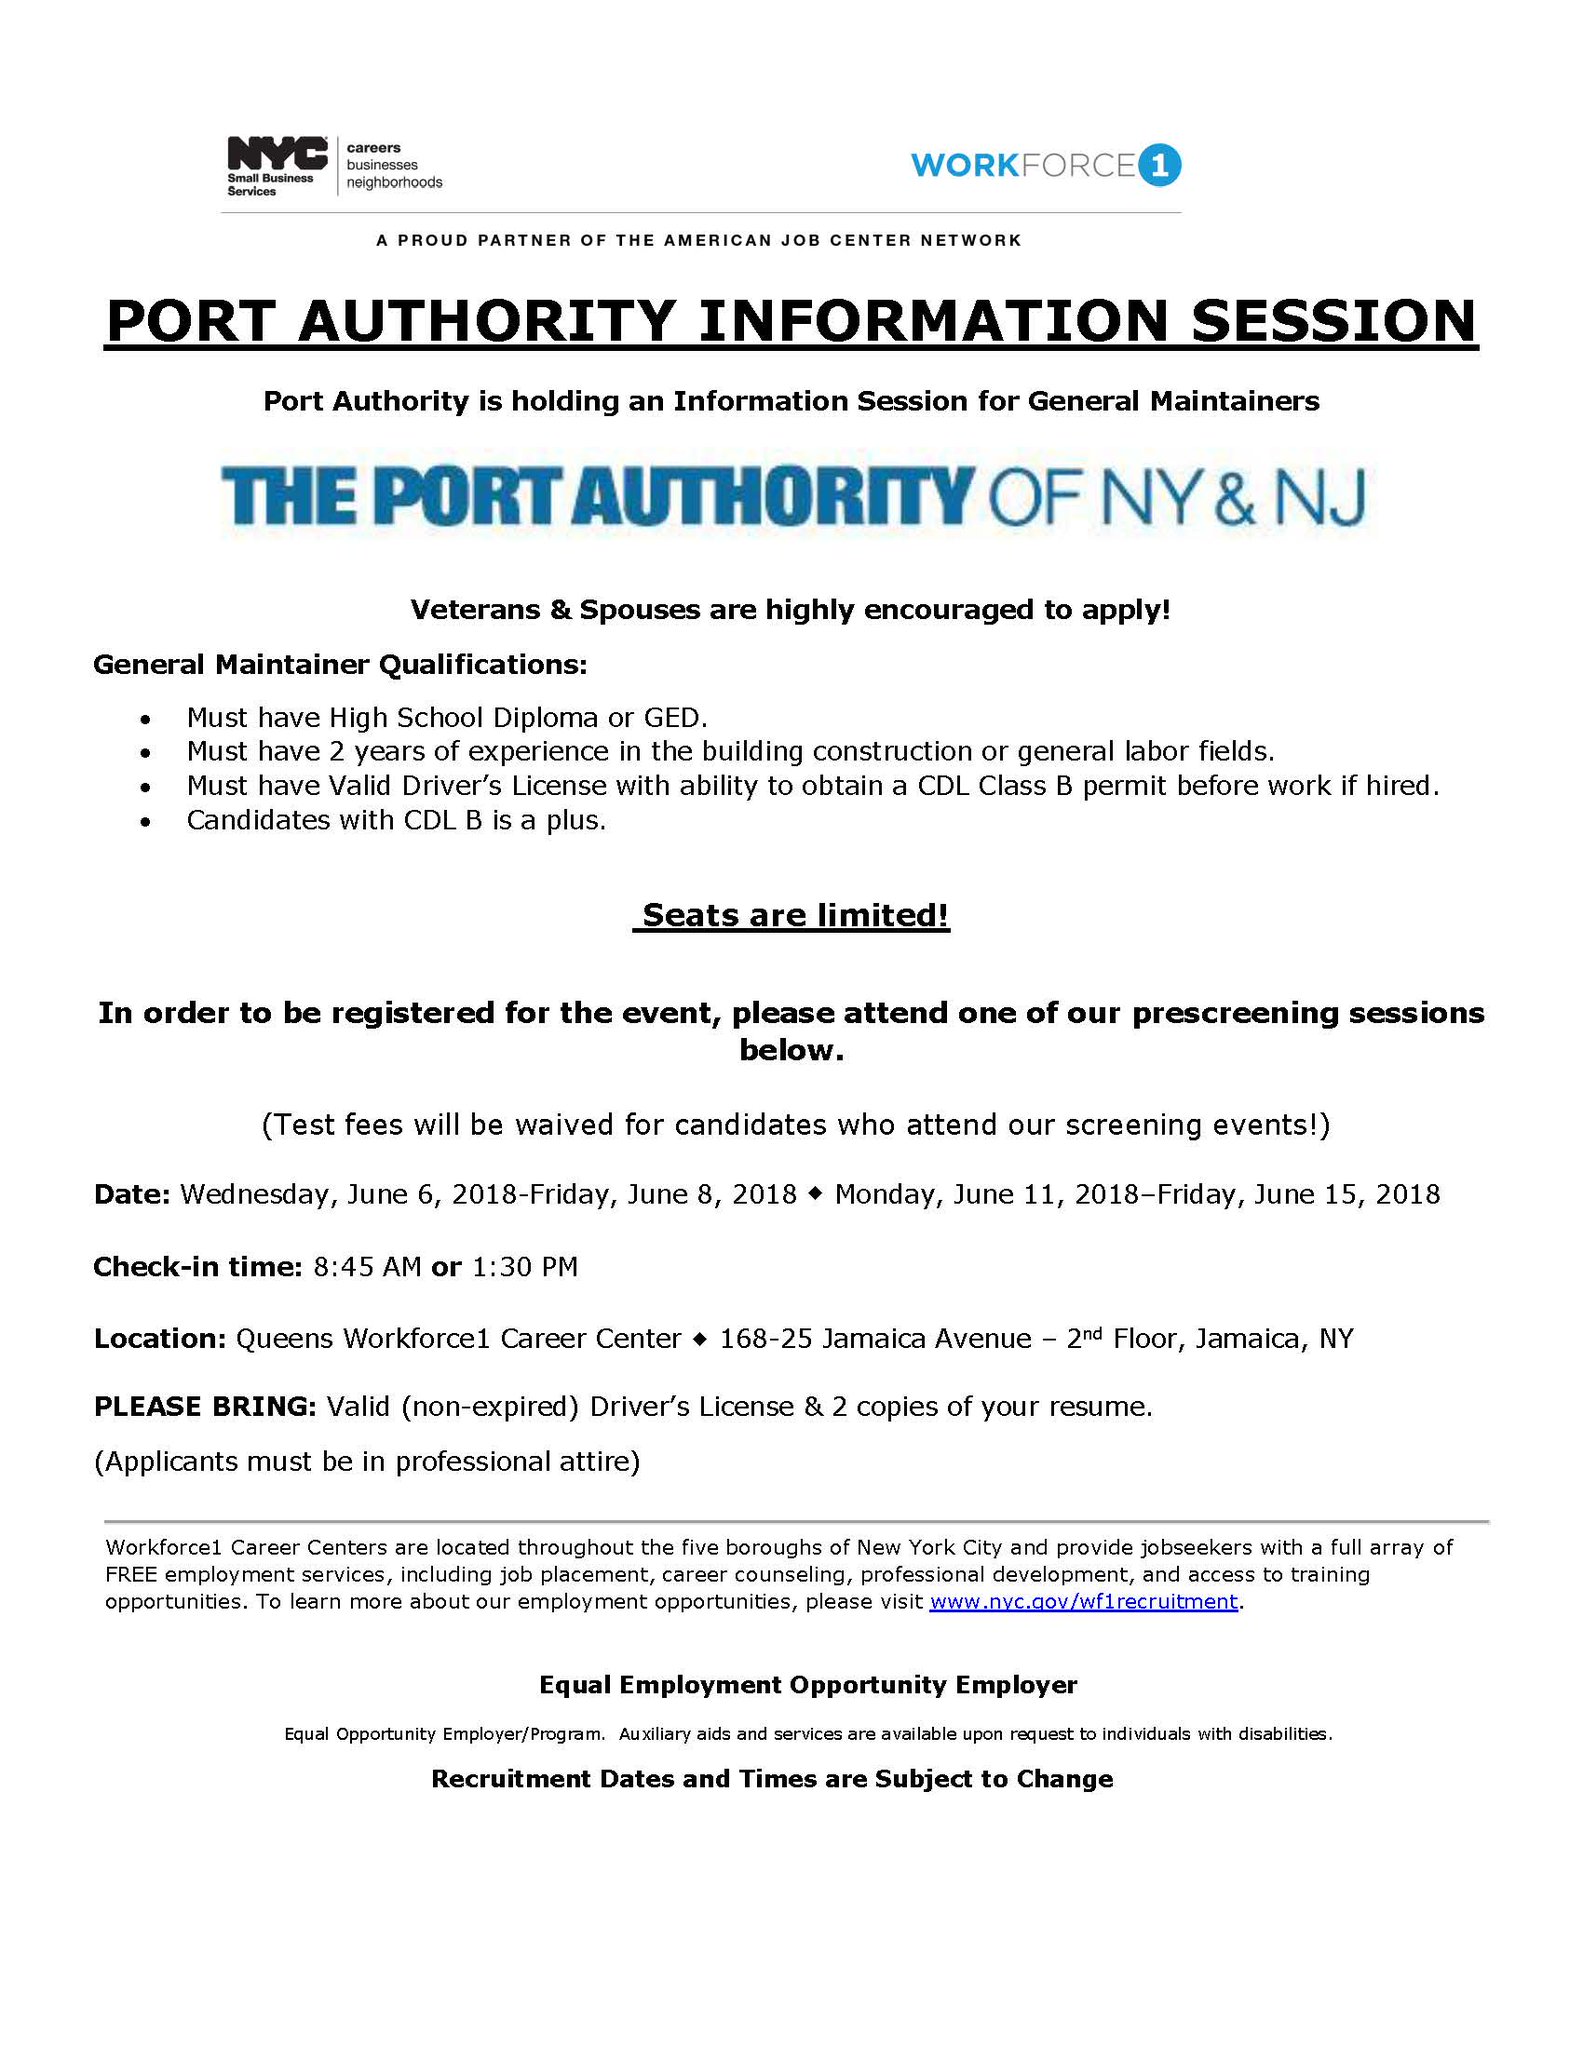 Port Authority NY&NJ on Twitter "We're hiring General Maintainers and are looking for